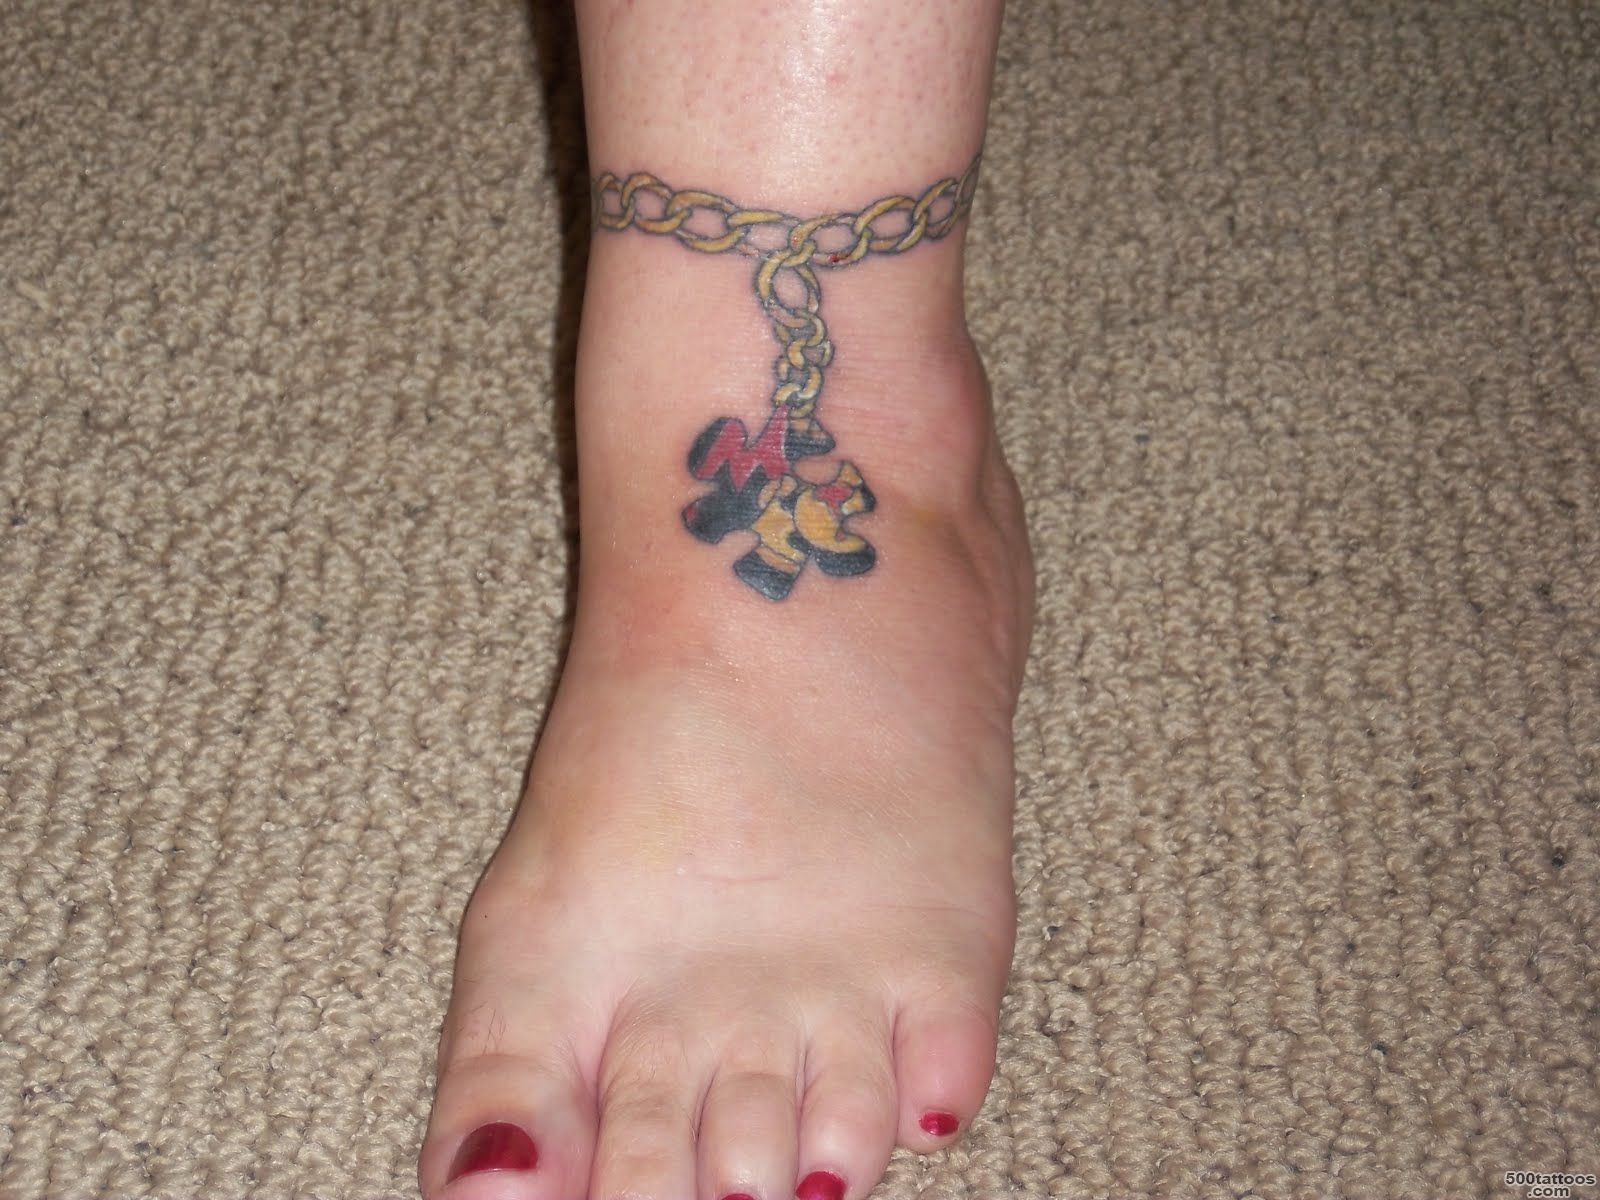 ankle bracelet tattoo with charms   motherdaughtertattoo_16